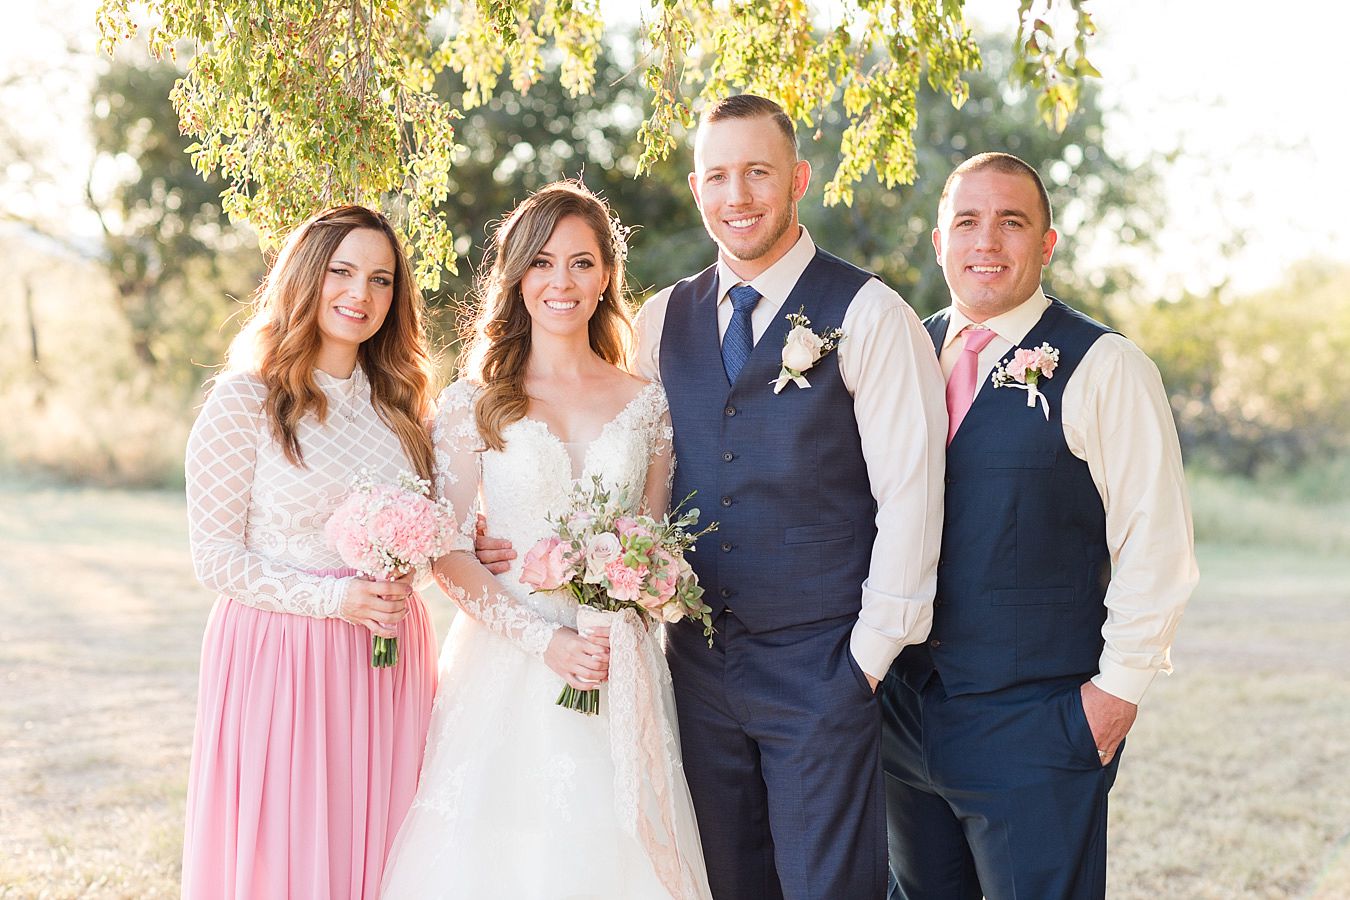 bridal party photos, bride and groom, navy and pink wedding colors